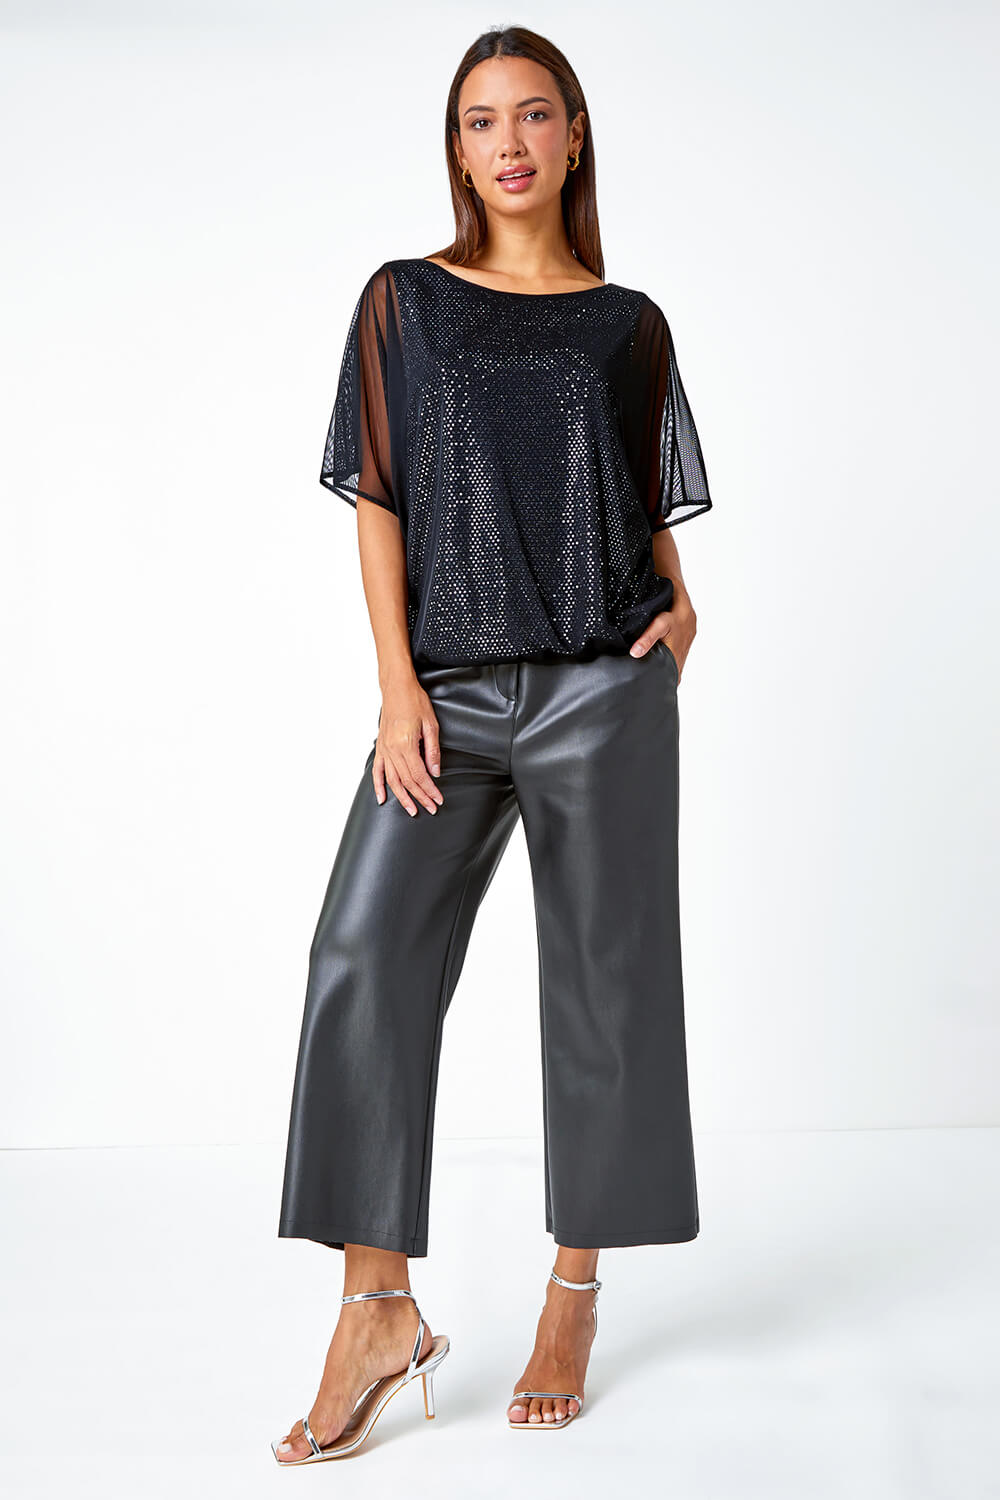 Black Sparkle Mesh Stretch Overlay Top, Image 2 of 5